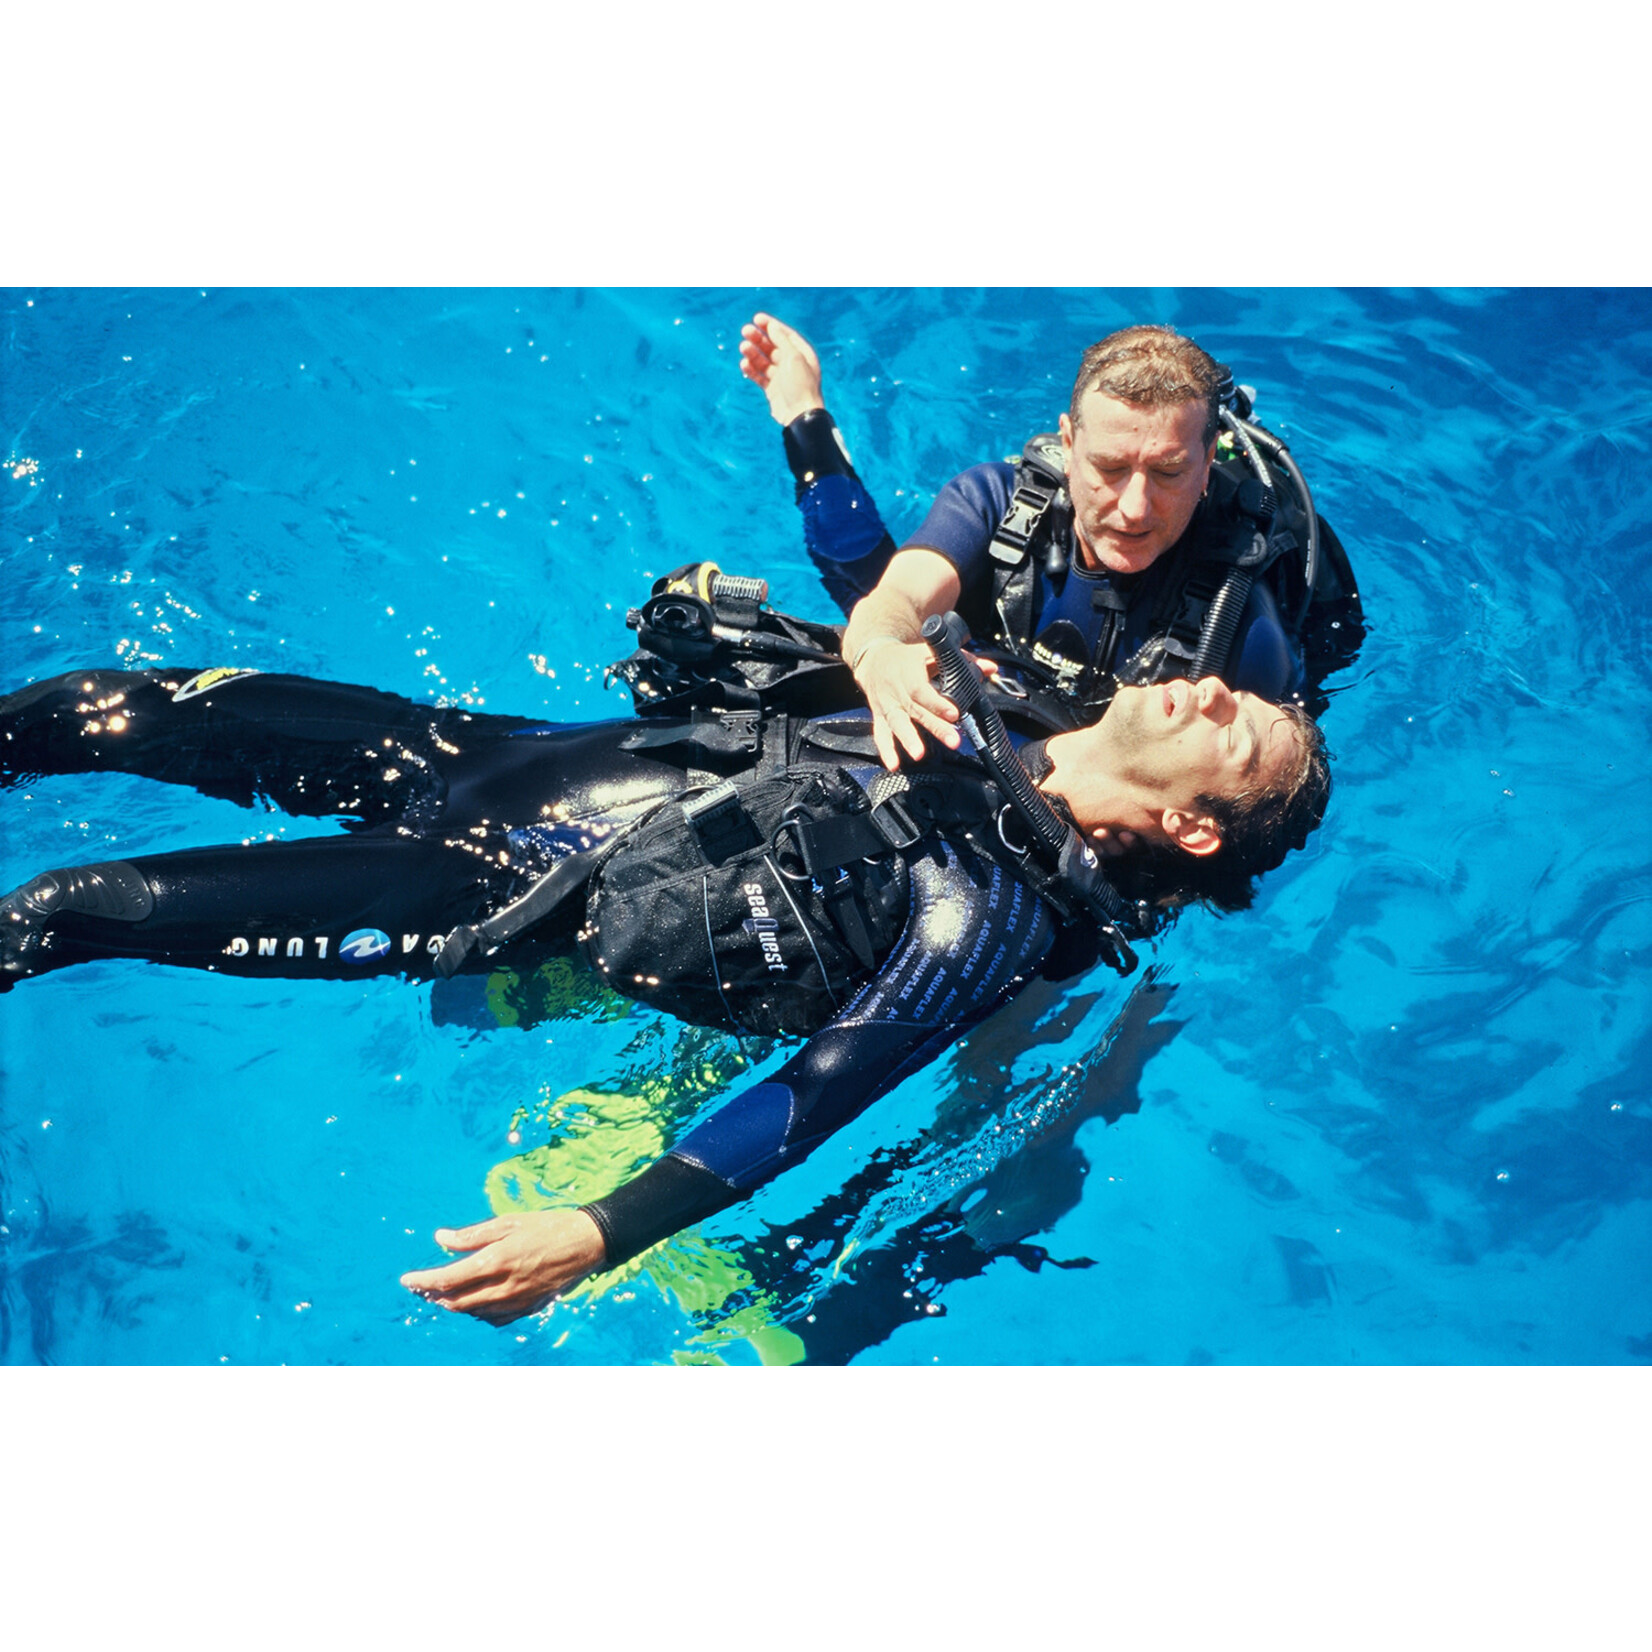 Rescue Diver Course: Lynnwood